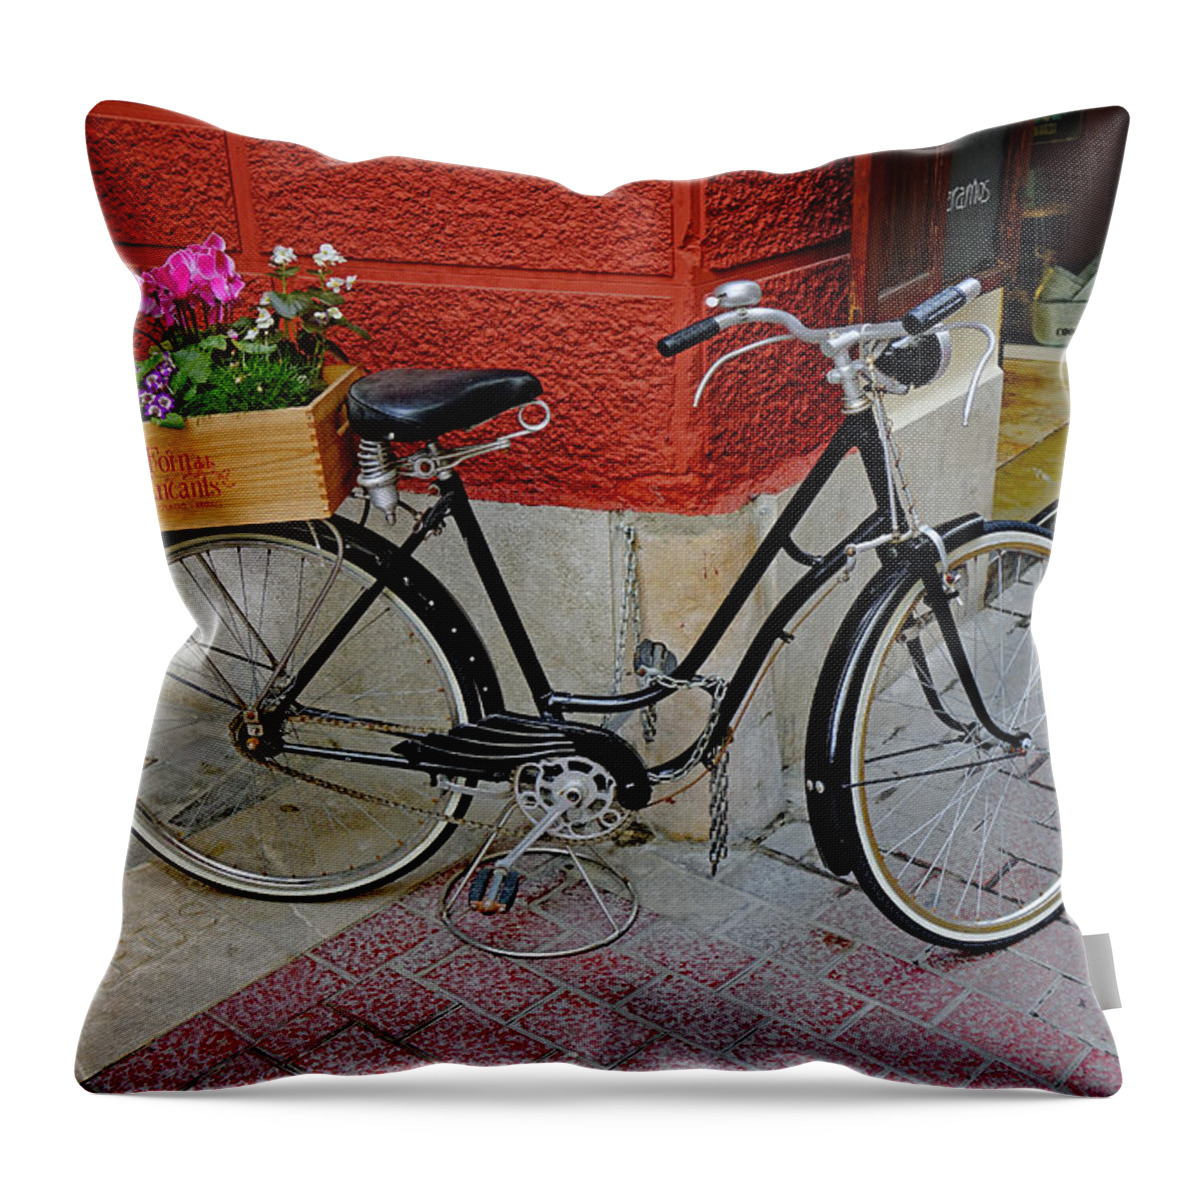 Bicycle Throw Pillow featuring the photograph Bicycle With Flowers In Palma Majorca Spain by Rick Rosenshein